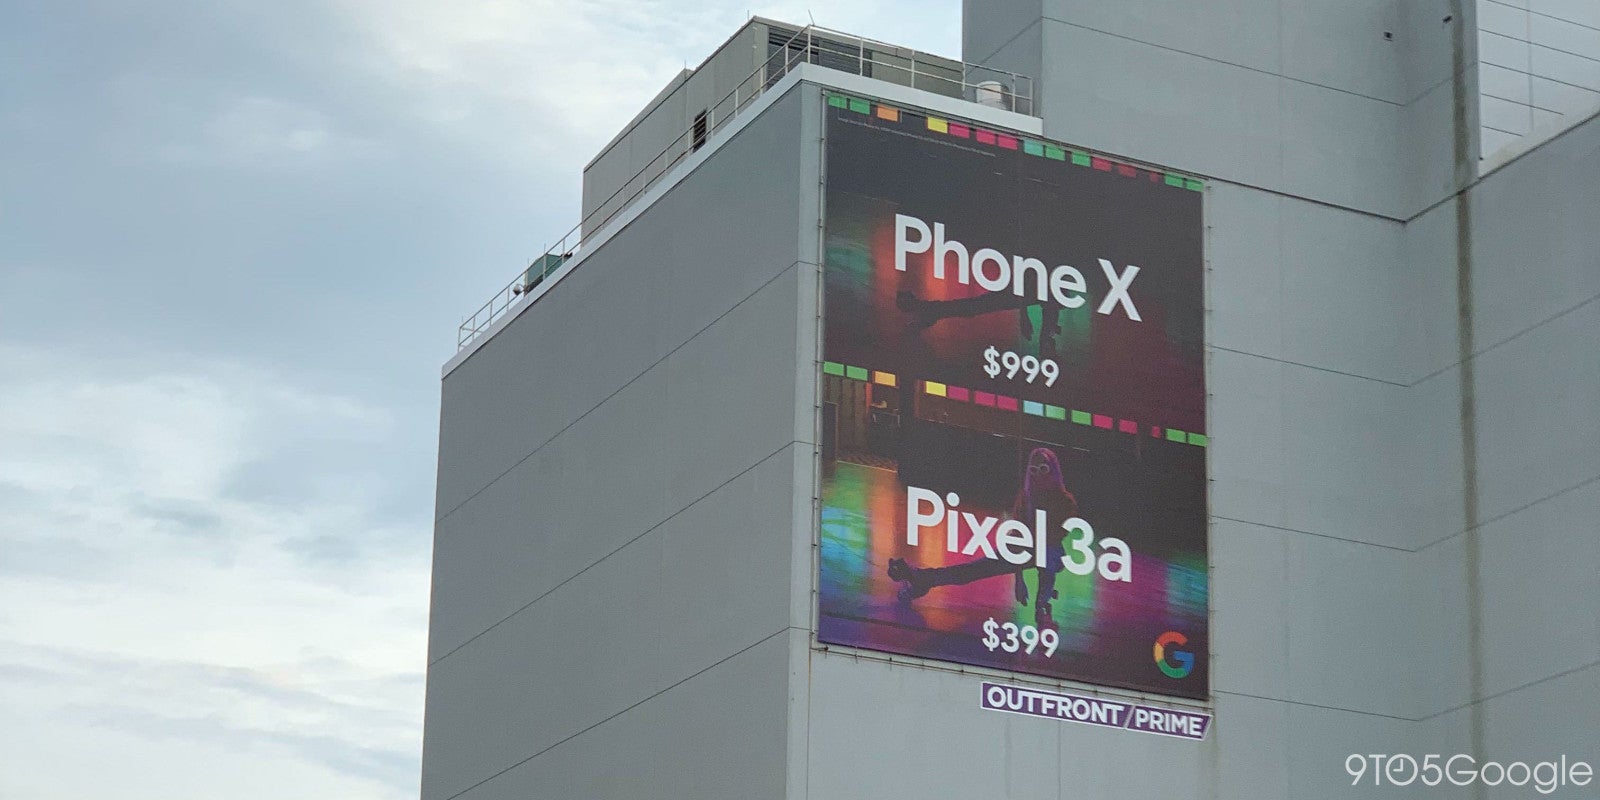 Billboard near Washington D.C. Apple Store promotes Night Sight on the Pixel 3a - Google once again goes back to 2009, this time to promote the Pixel 3a